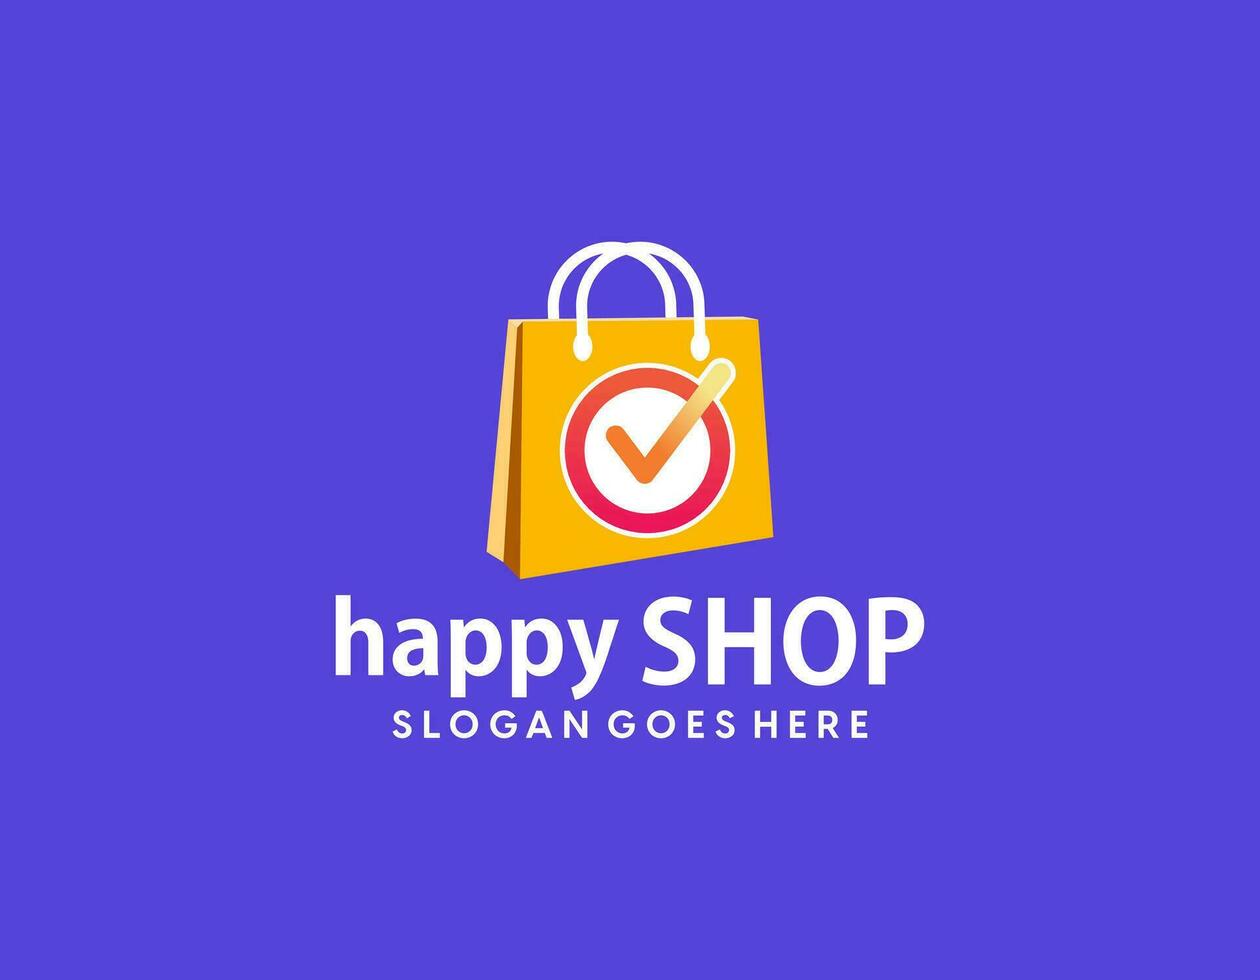 Online store logo. Shops, sale, discount, store or shop the web element in the form of vector shopping bag